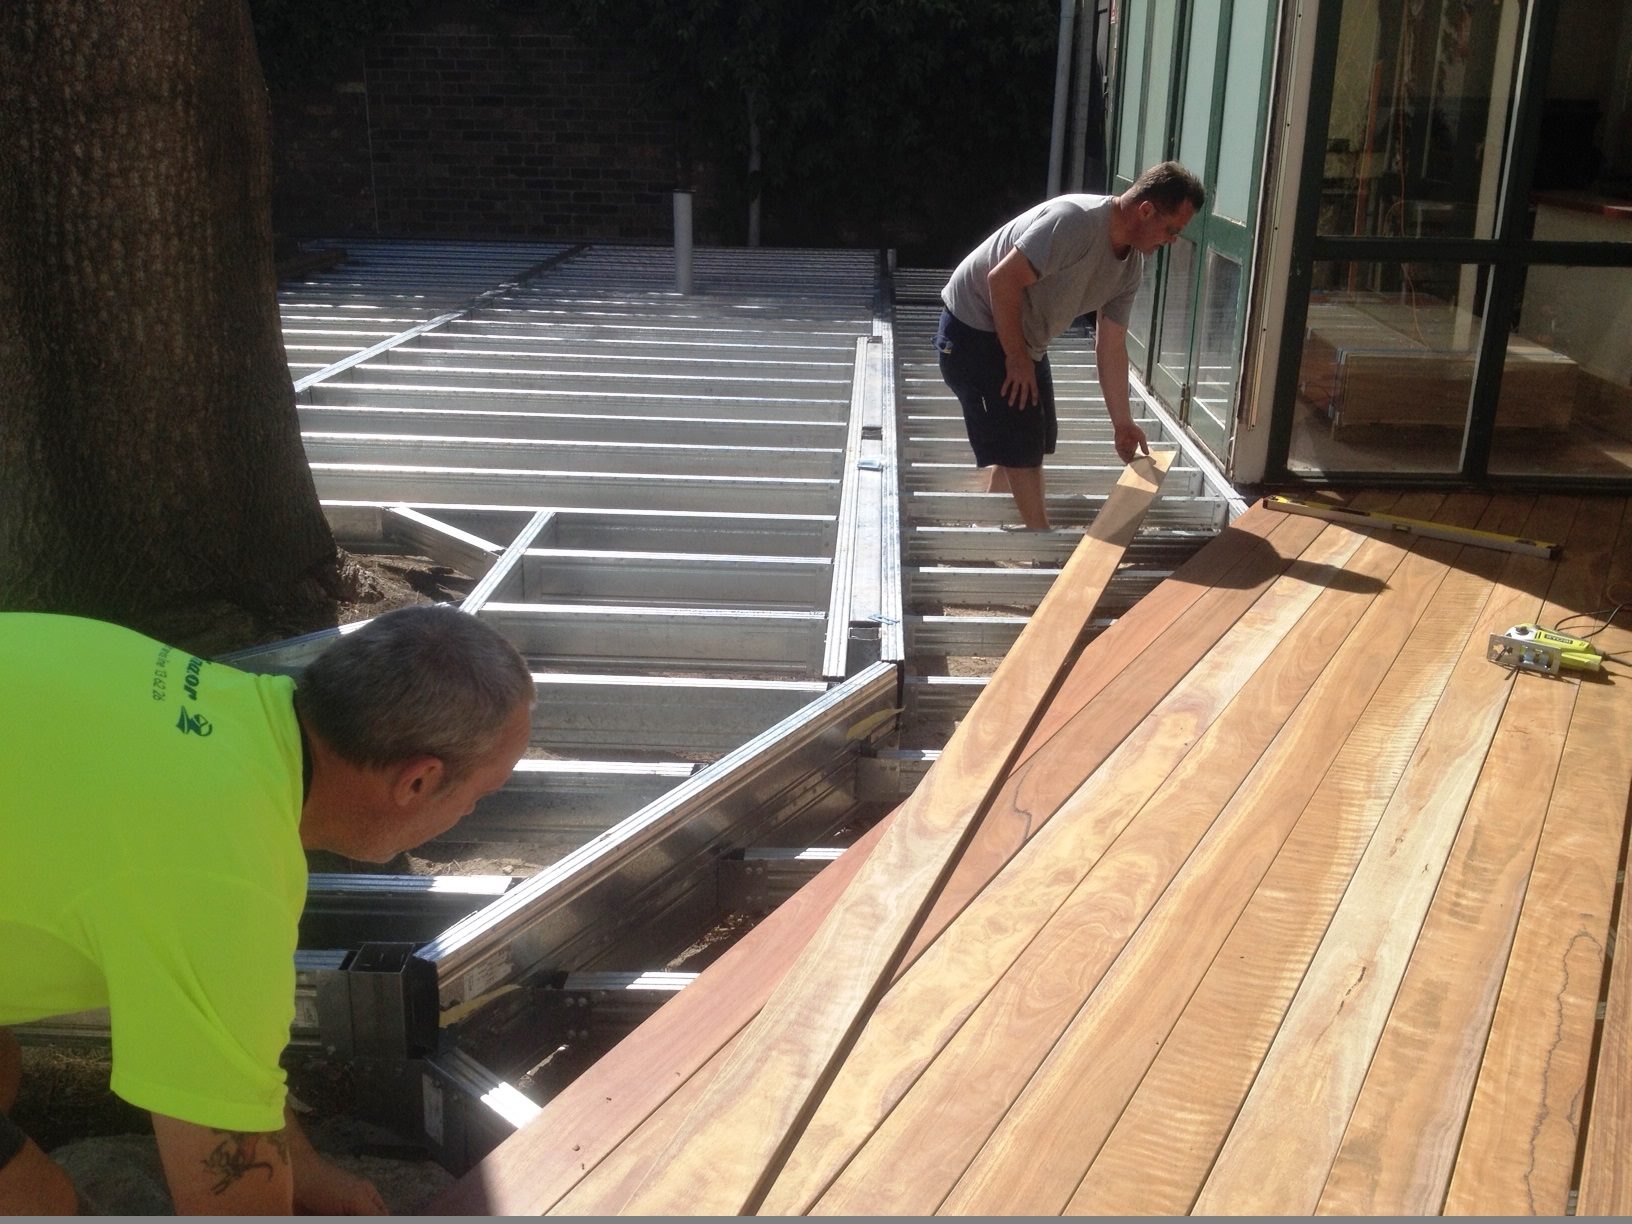 Installation of wide decking boards on a commercial deck at a pub outdoor dining area